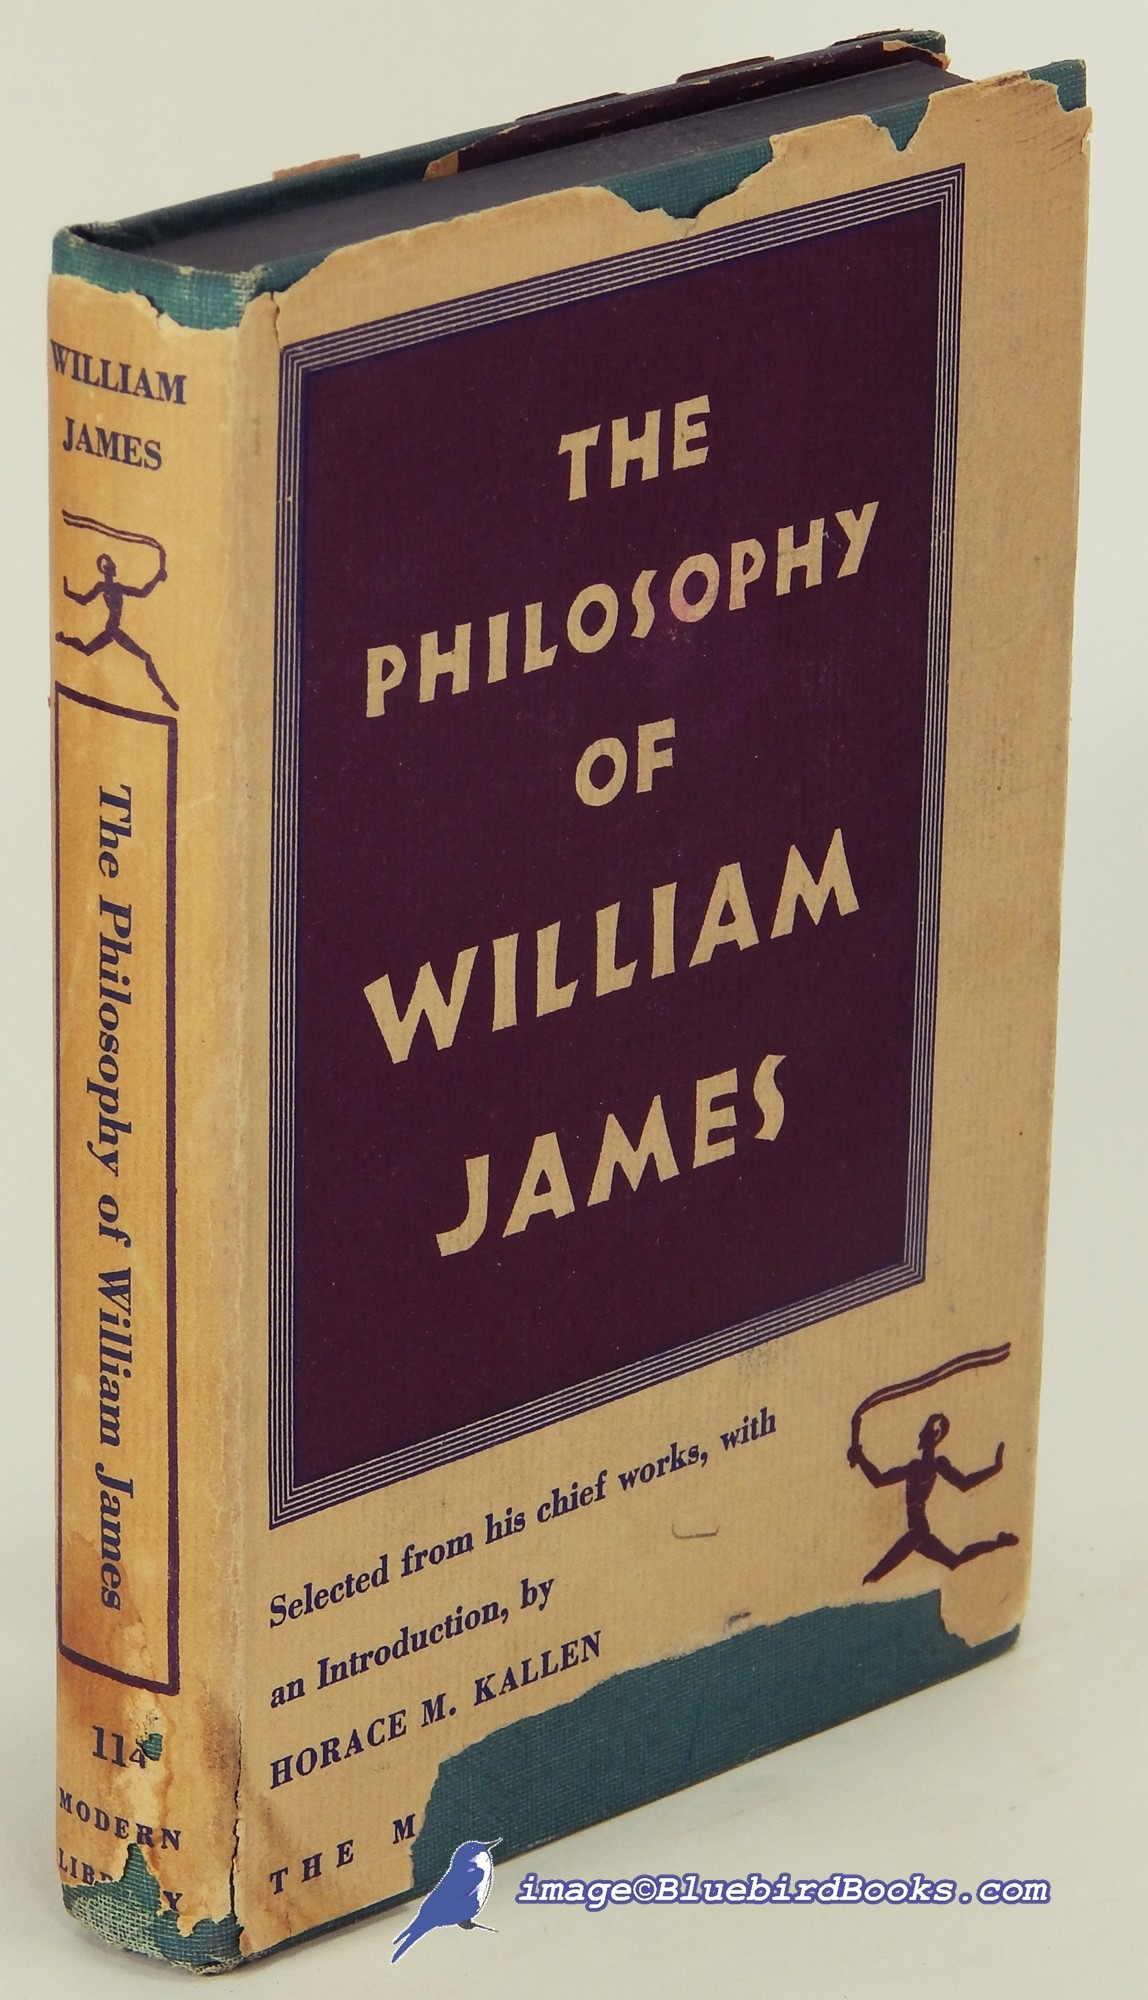 Image for The Philosophy of William James: Selected from His Chief Works (Modern Library #114.1)